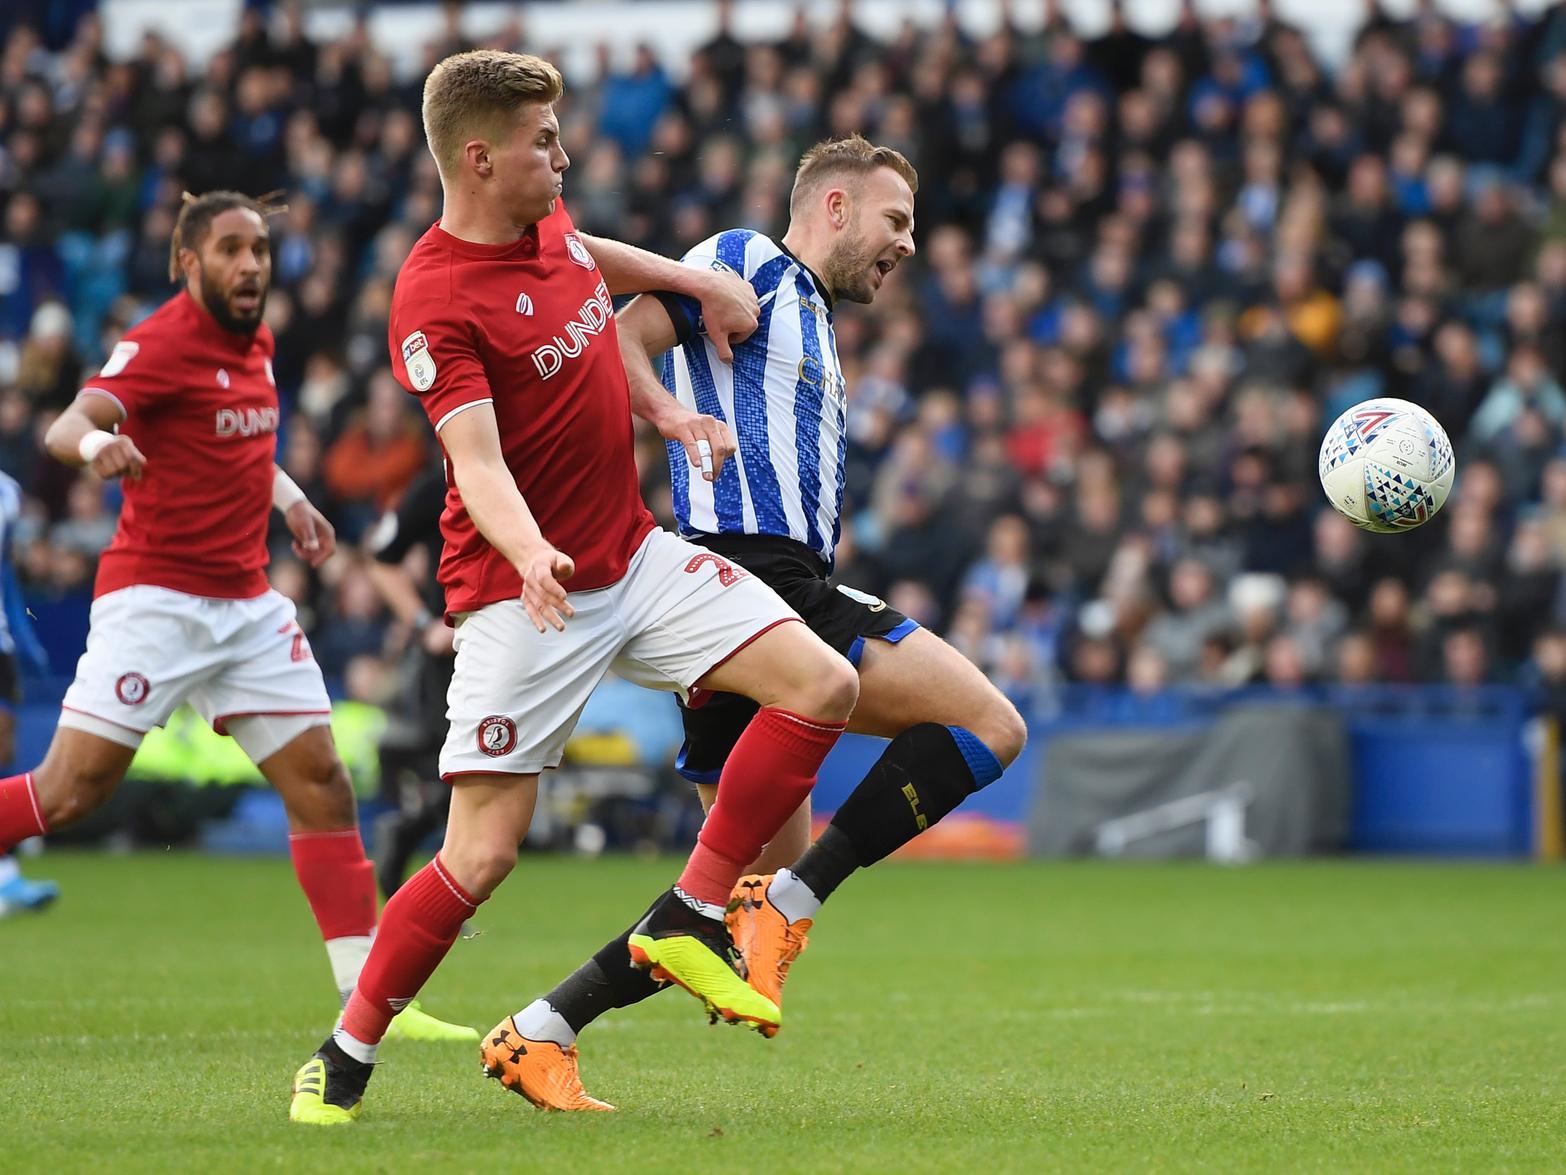 Wigan Athletic are rumoured to have upped their efforts to sign a new striker, with a loan move for Sheffield Wednesday's Jordan Rhodes understood to be among their top targets. (Football Insider)